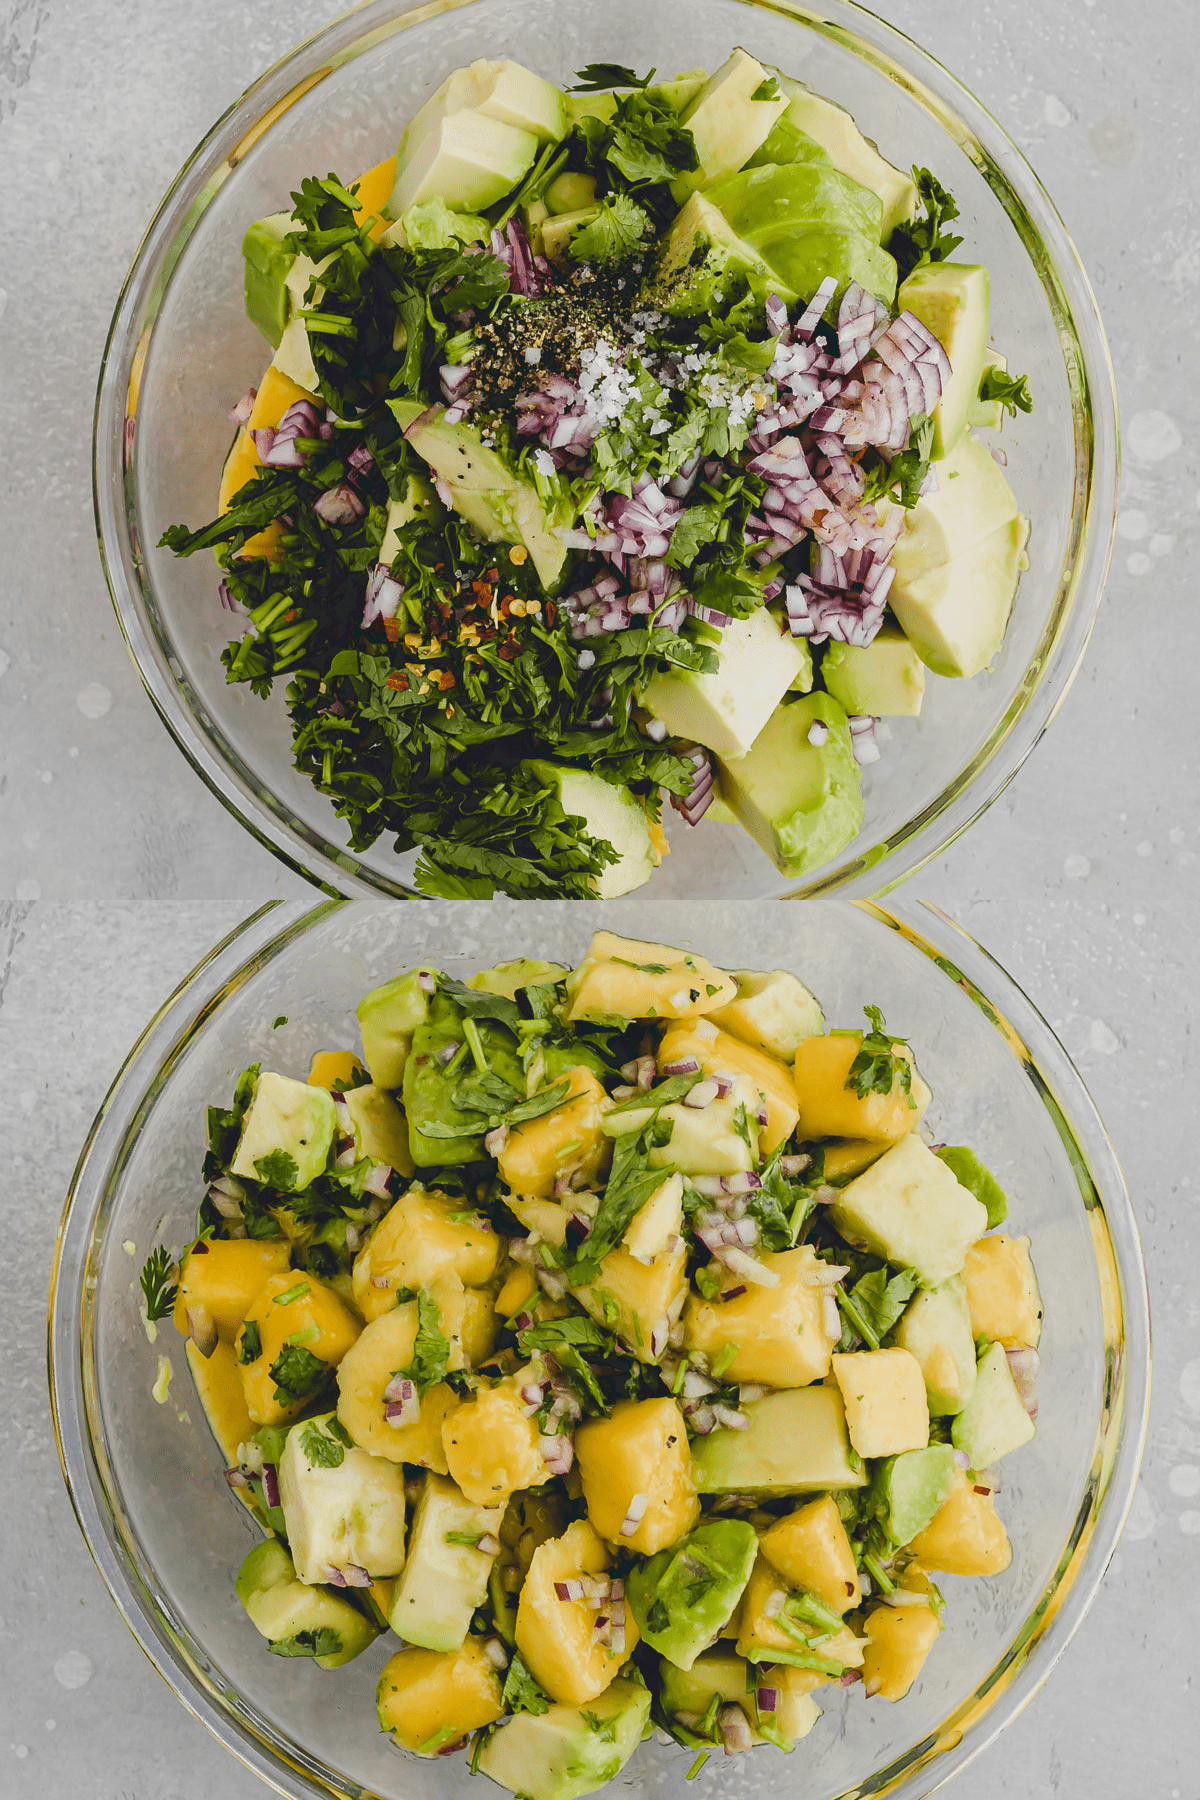 Two photos one on top of the other. Both are top views of a glass bowl filled with mango avocado salad - the top picture is all the ingredients, unmixed, the bottom picture is the salad mixed together. 